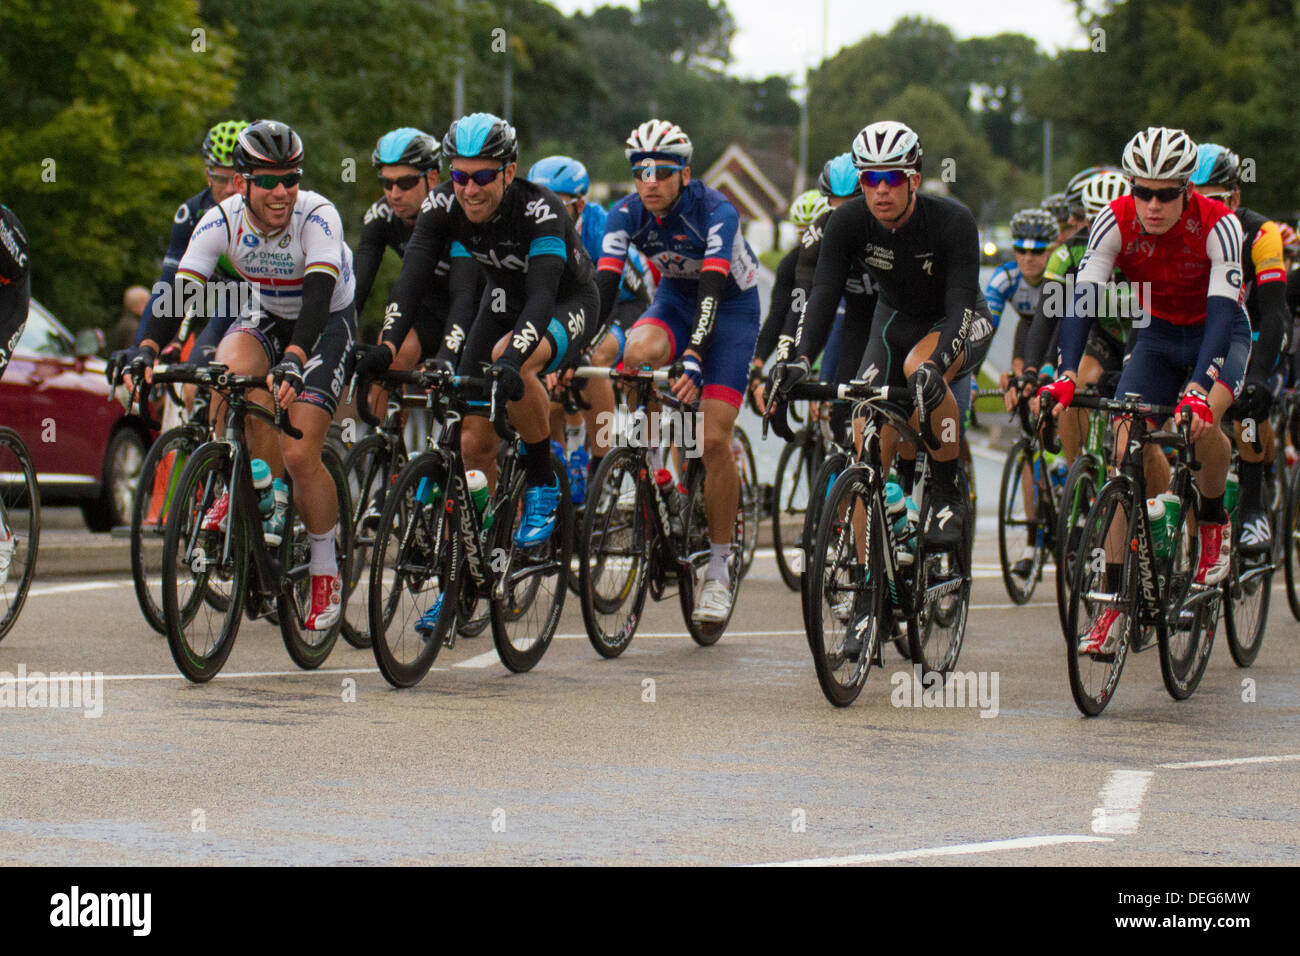 Stoke on Trent, Staffordshire, UK. 18th Sep, 2013. Mark Cavendish of Omega Pharma Quick-step shares a joke with Team Sky as they pass through the Trentham area of Stoke on Trent, Staffordshire on stage 4 of the Tour of Britain. Credit:  Alex Williams/Alamy Live News Stock Photo